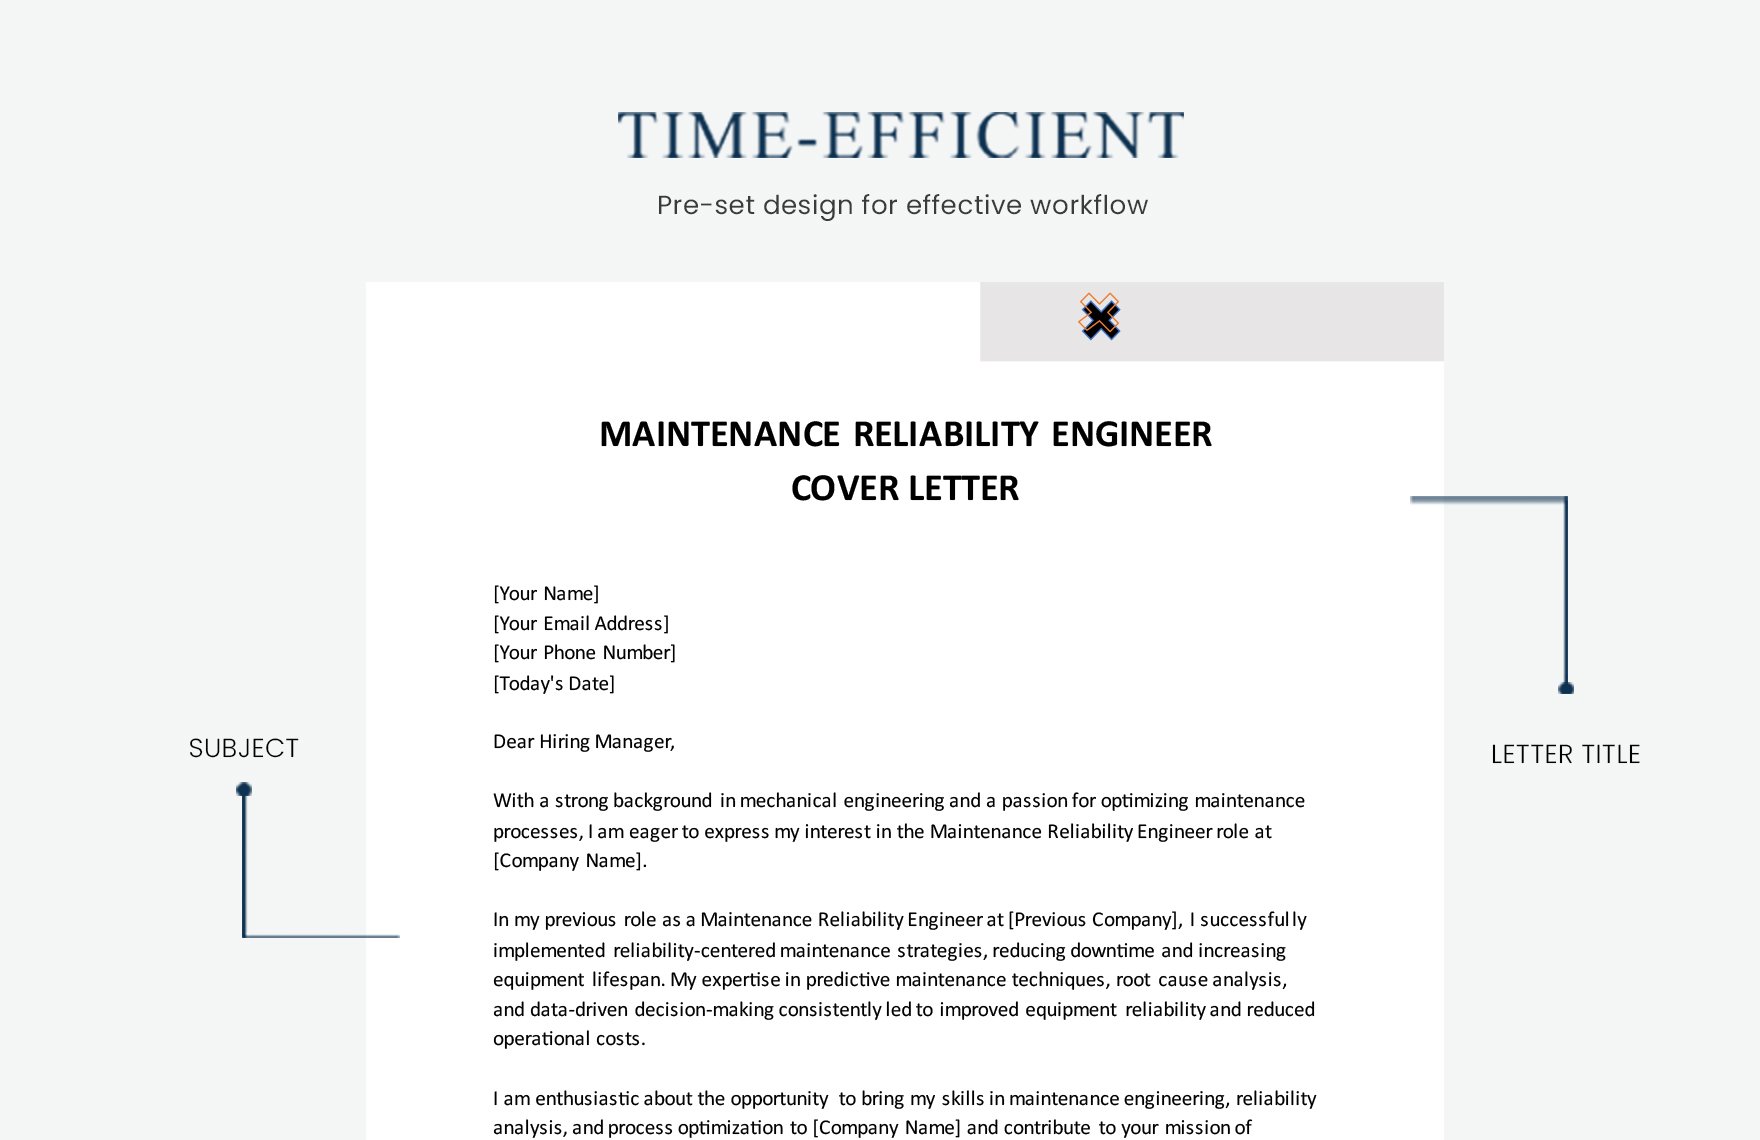 Maintenance Reliability Engineer Cover Letter